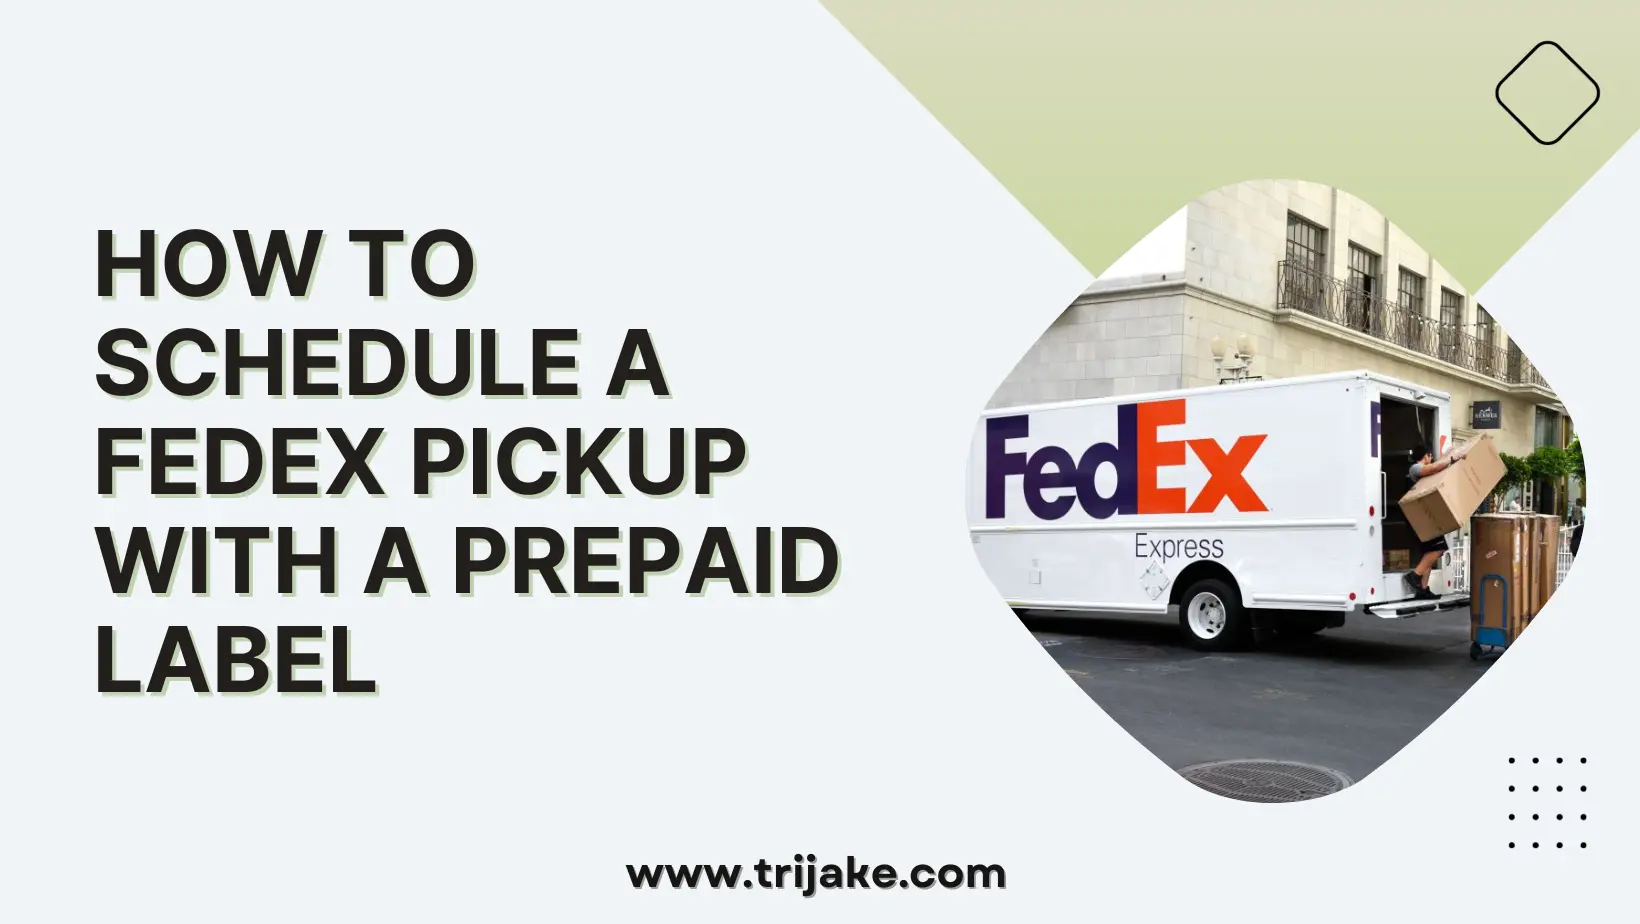 How to Schedule a FedEx Pickup